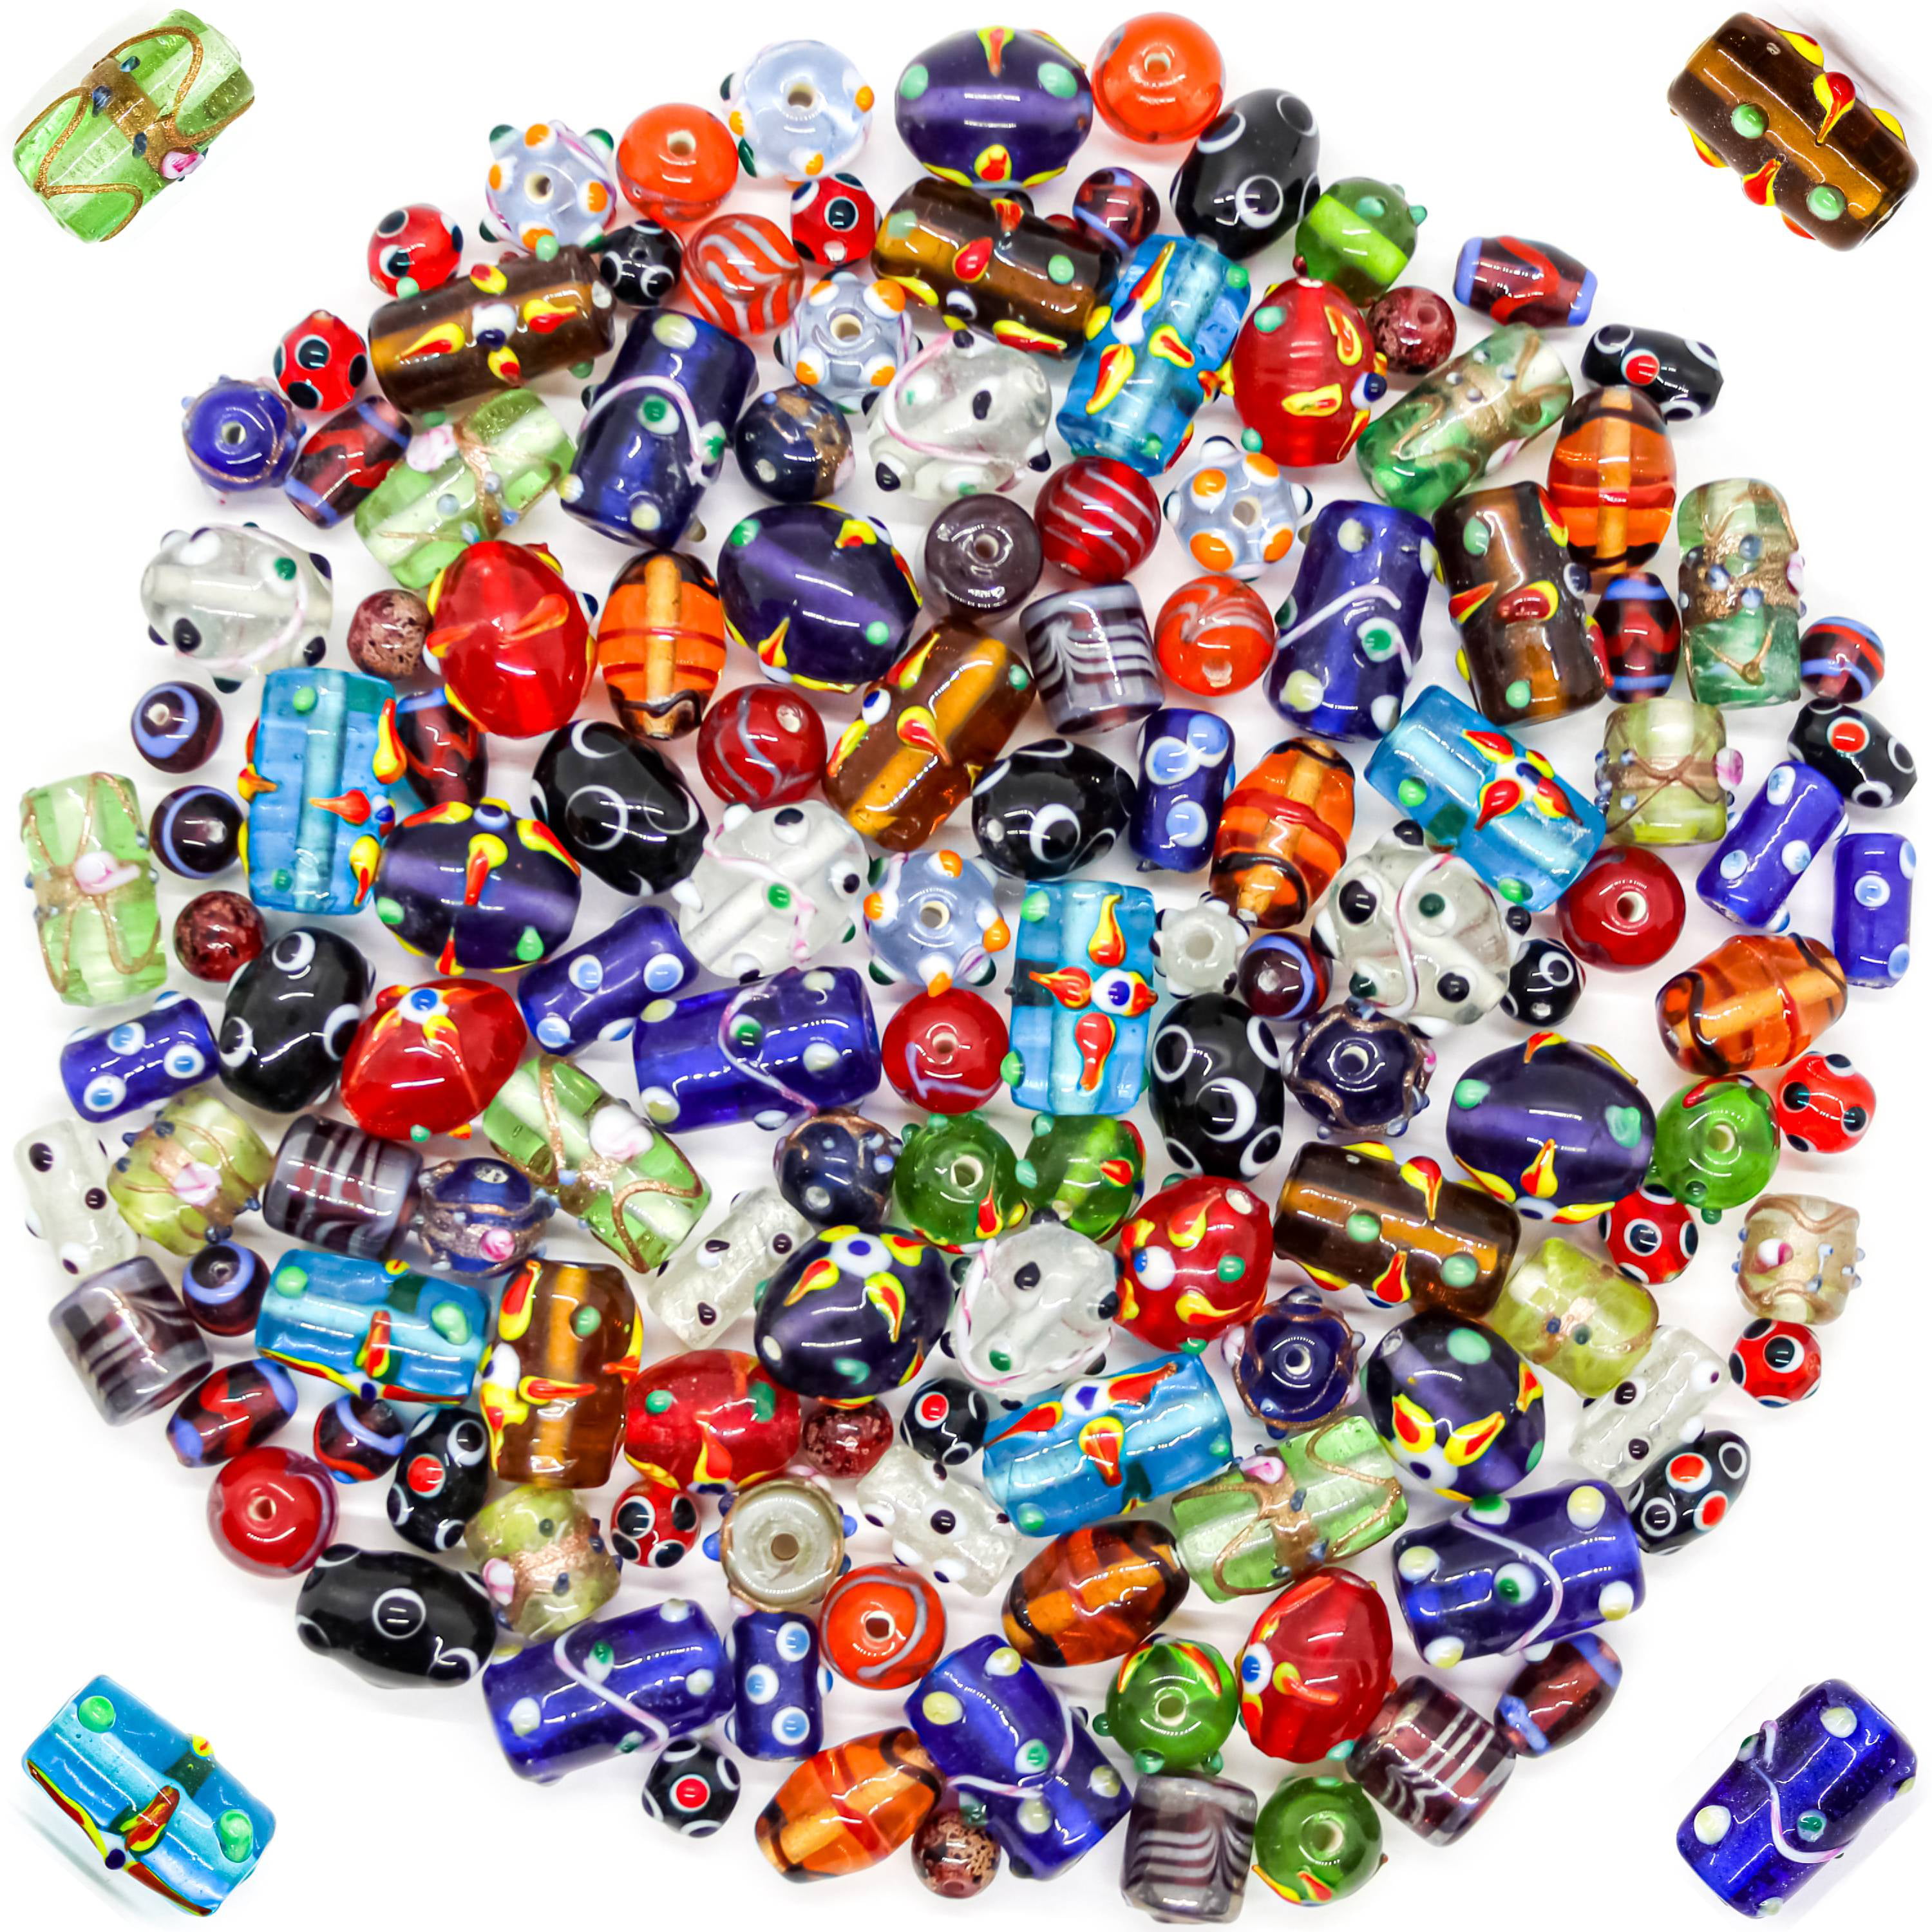 Glass Beads for Jewelry Making for Adults 120-140 Pieces ...
